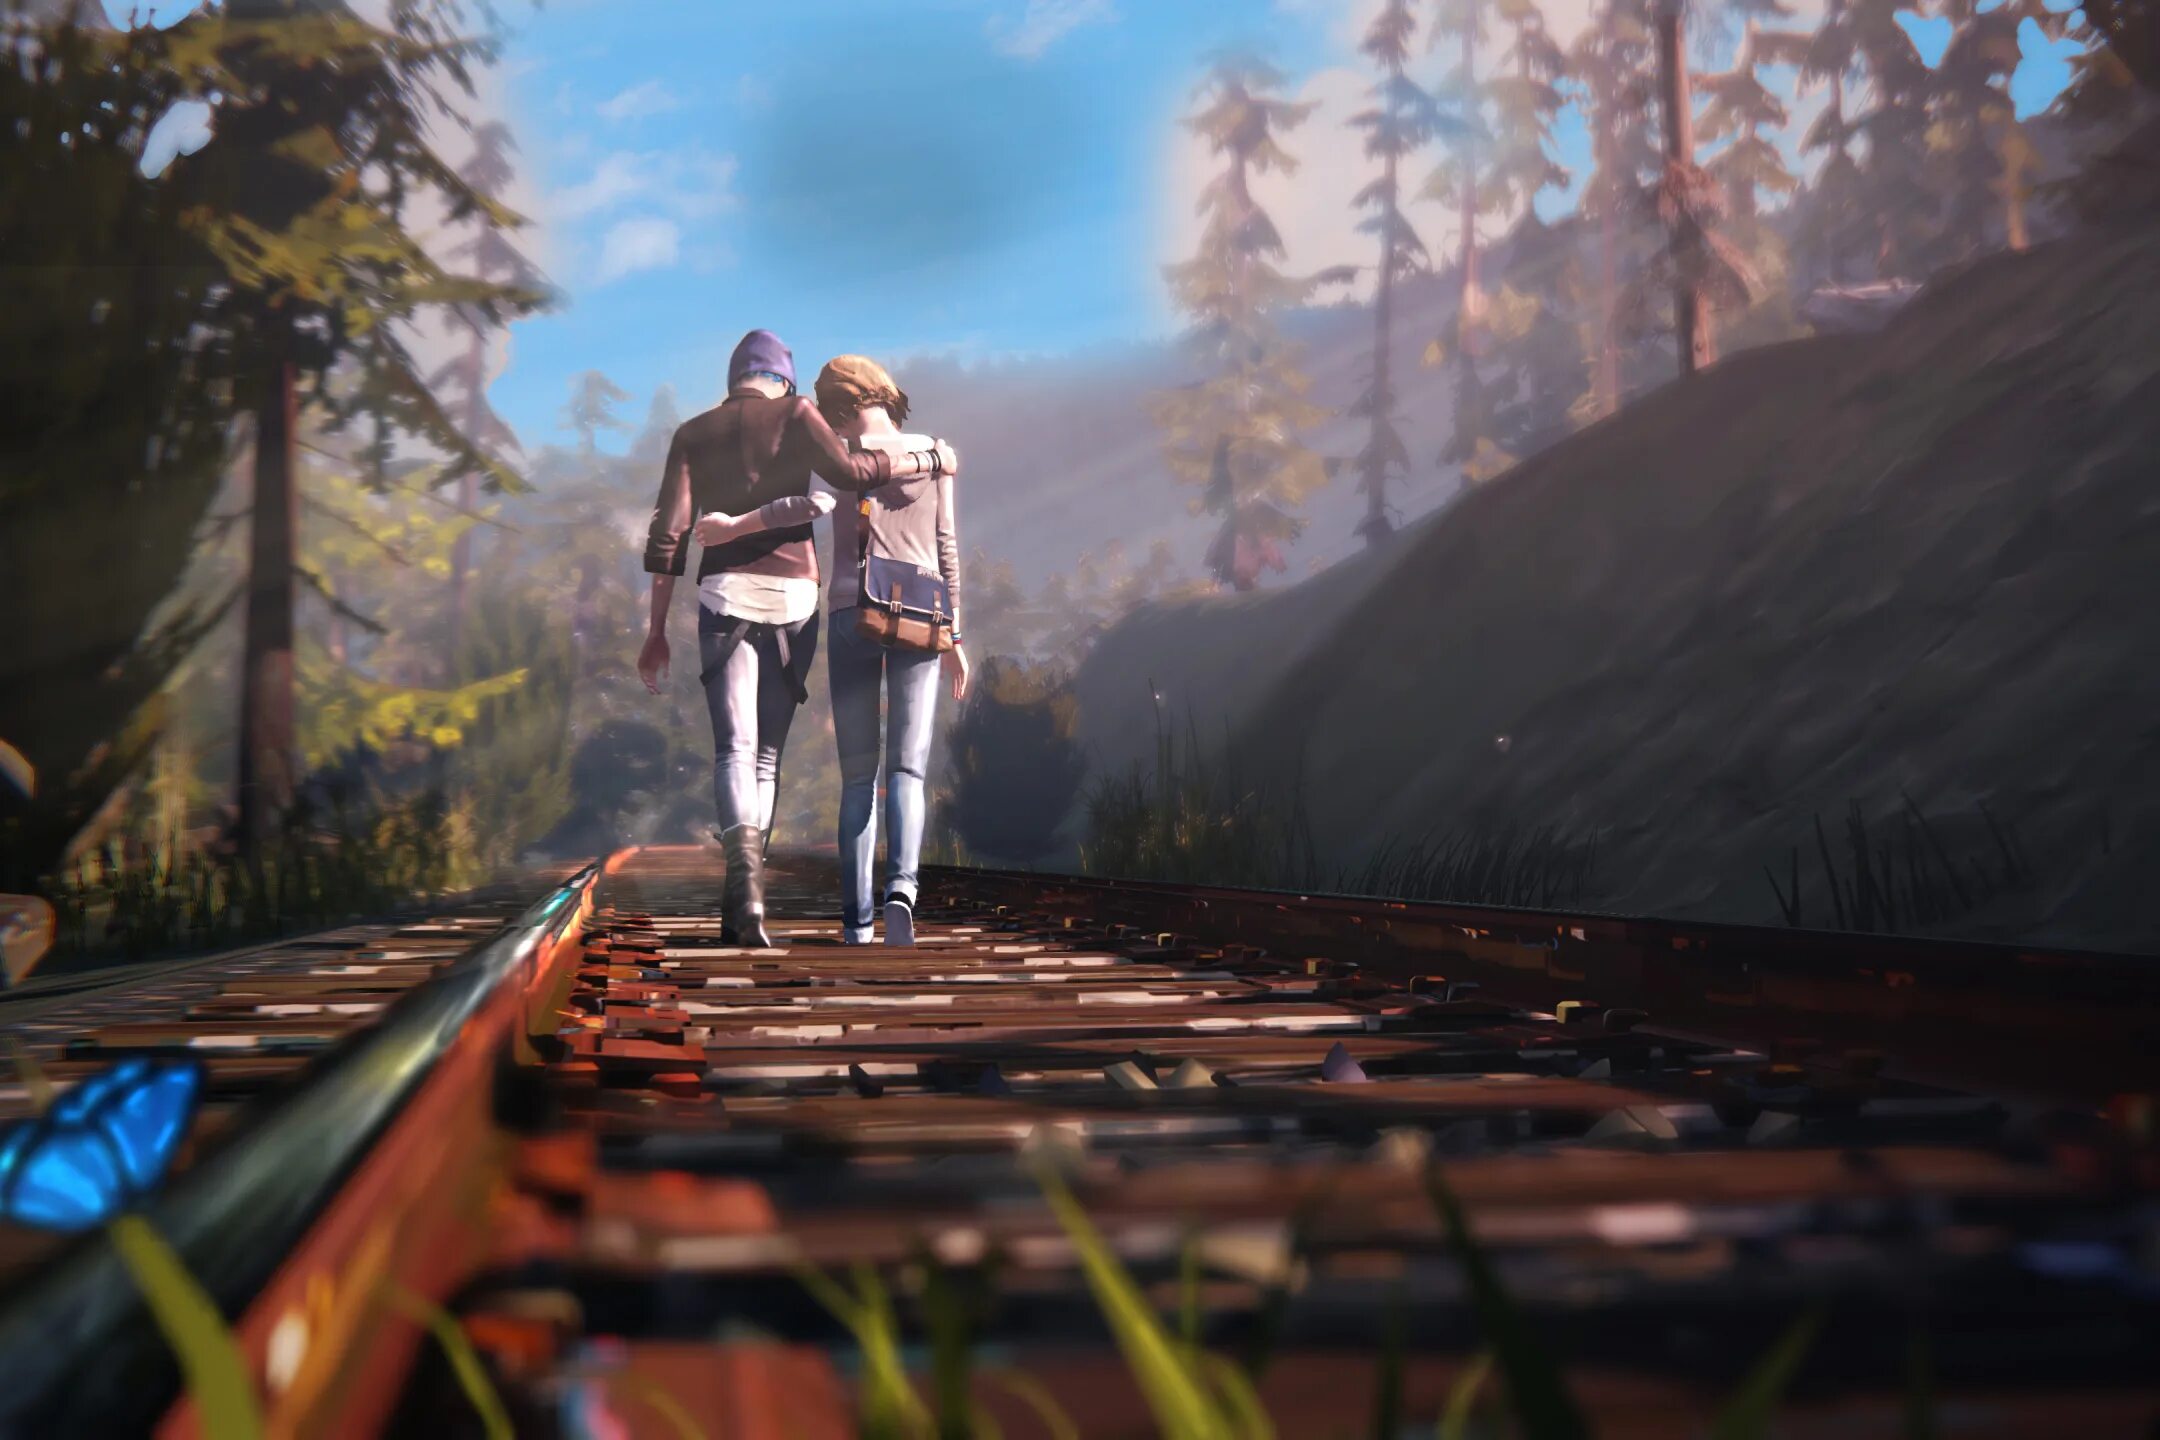 Your story adventure. Life is Strange 2 Forest Sunset.